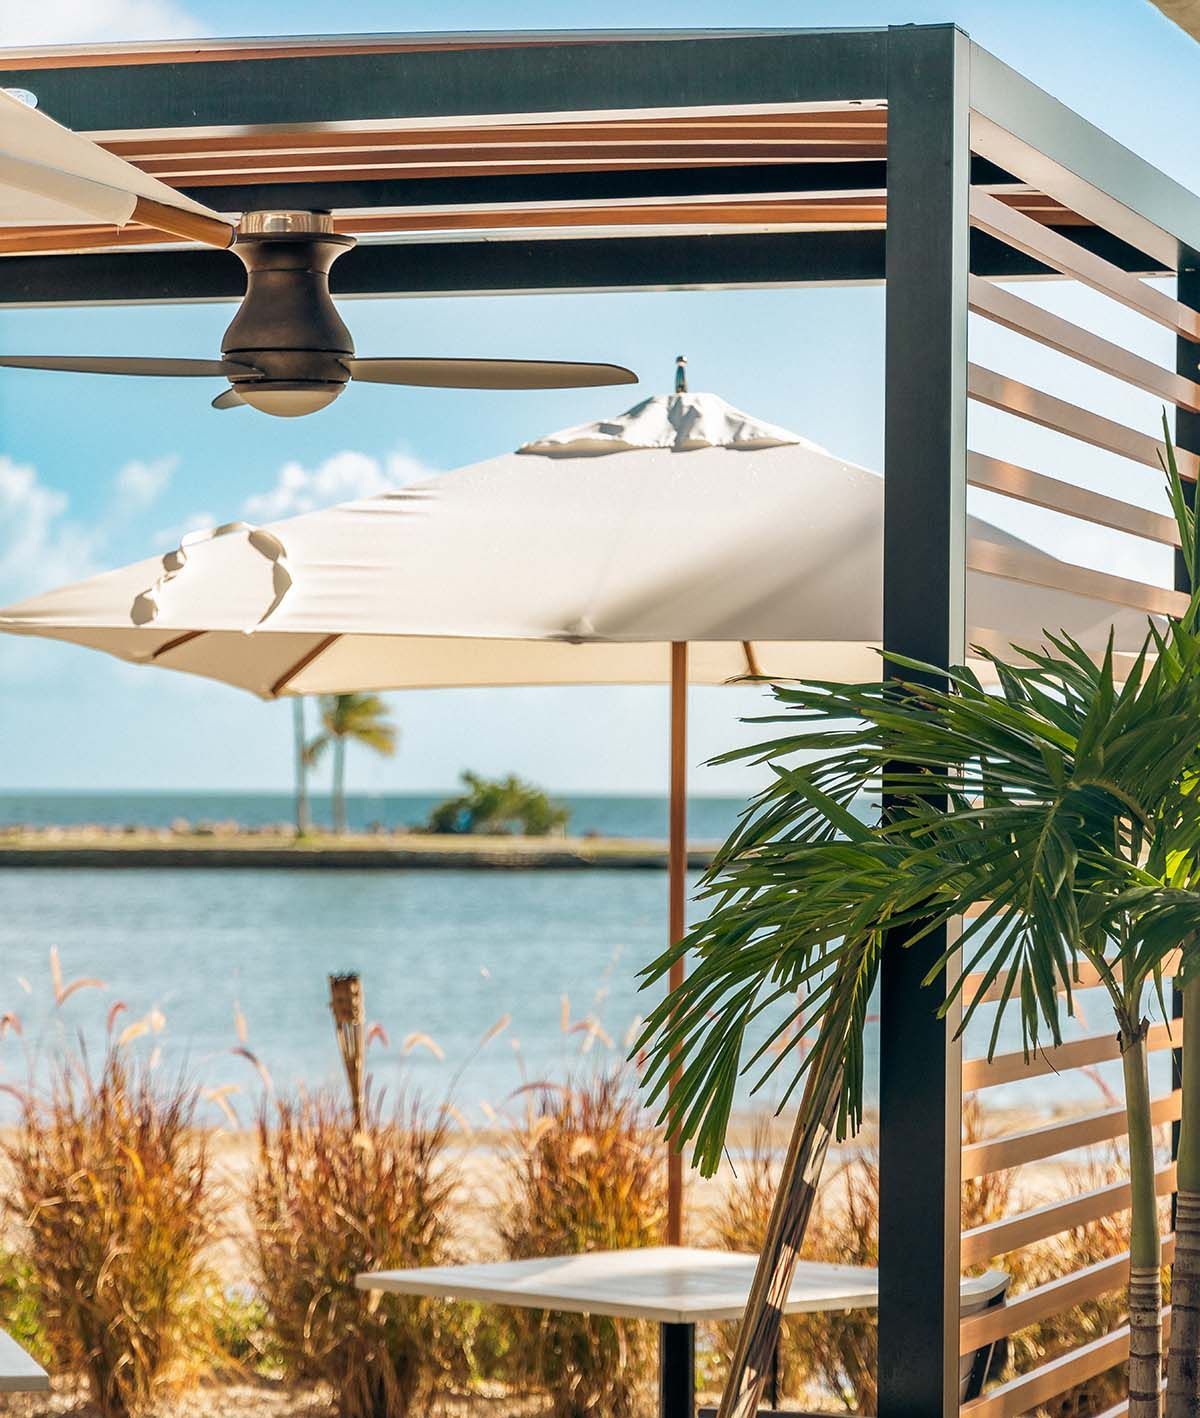 A pergola with umbrellas and a ceiling fan overlooking the ocean